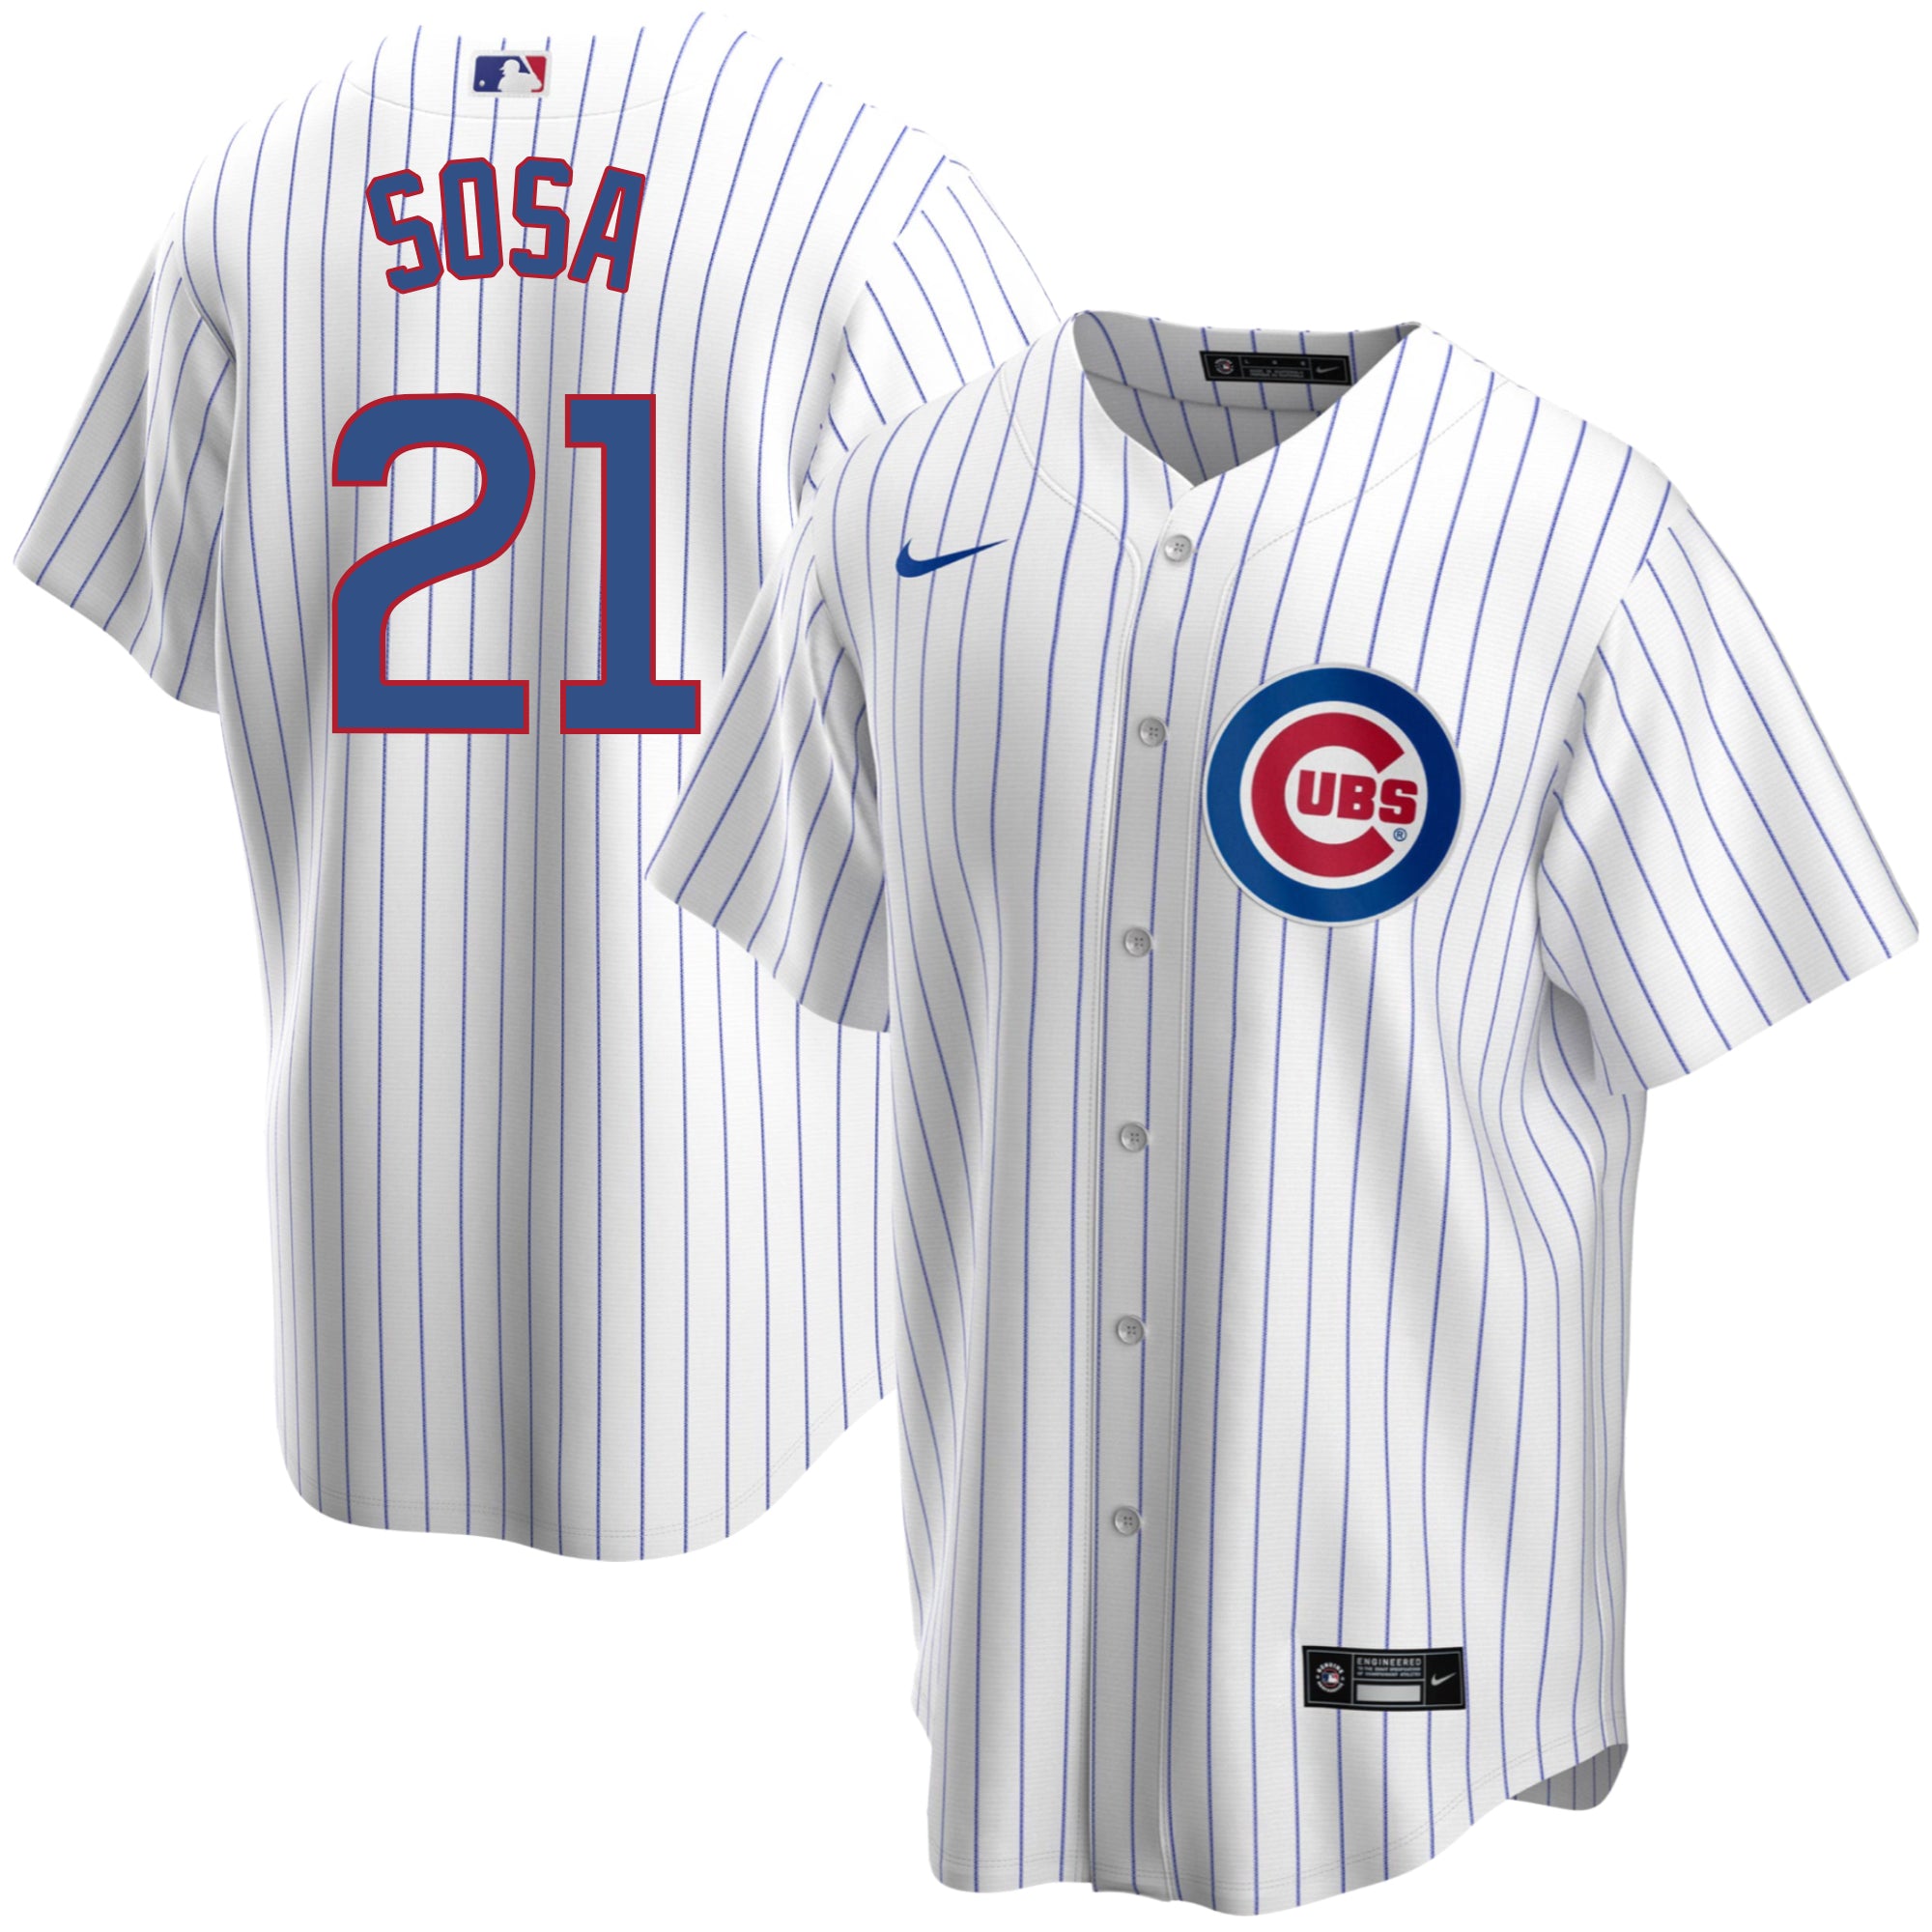 Sammy Sosa Jersey - Chicago Cubs Replica Adult Home Jersey